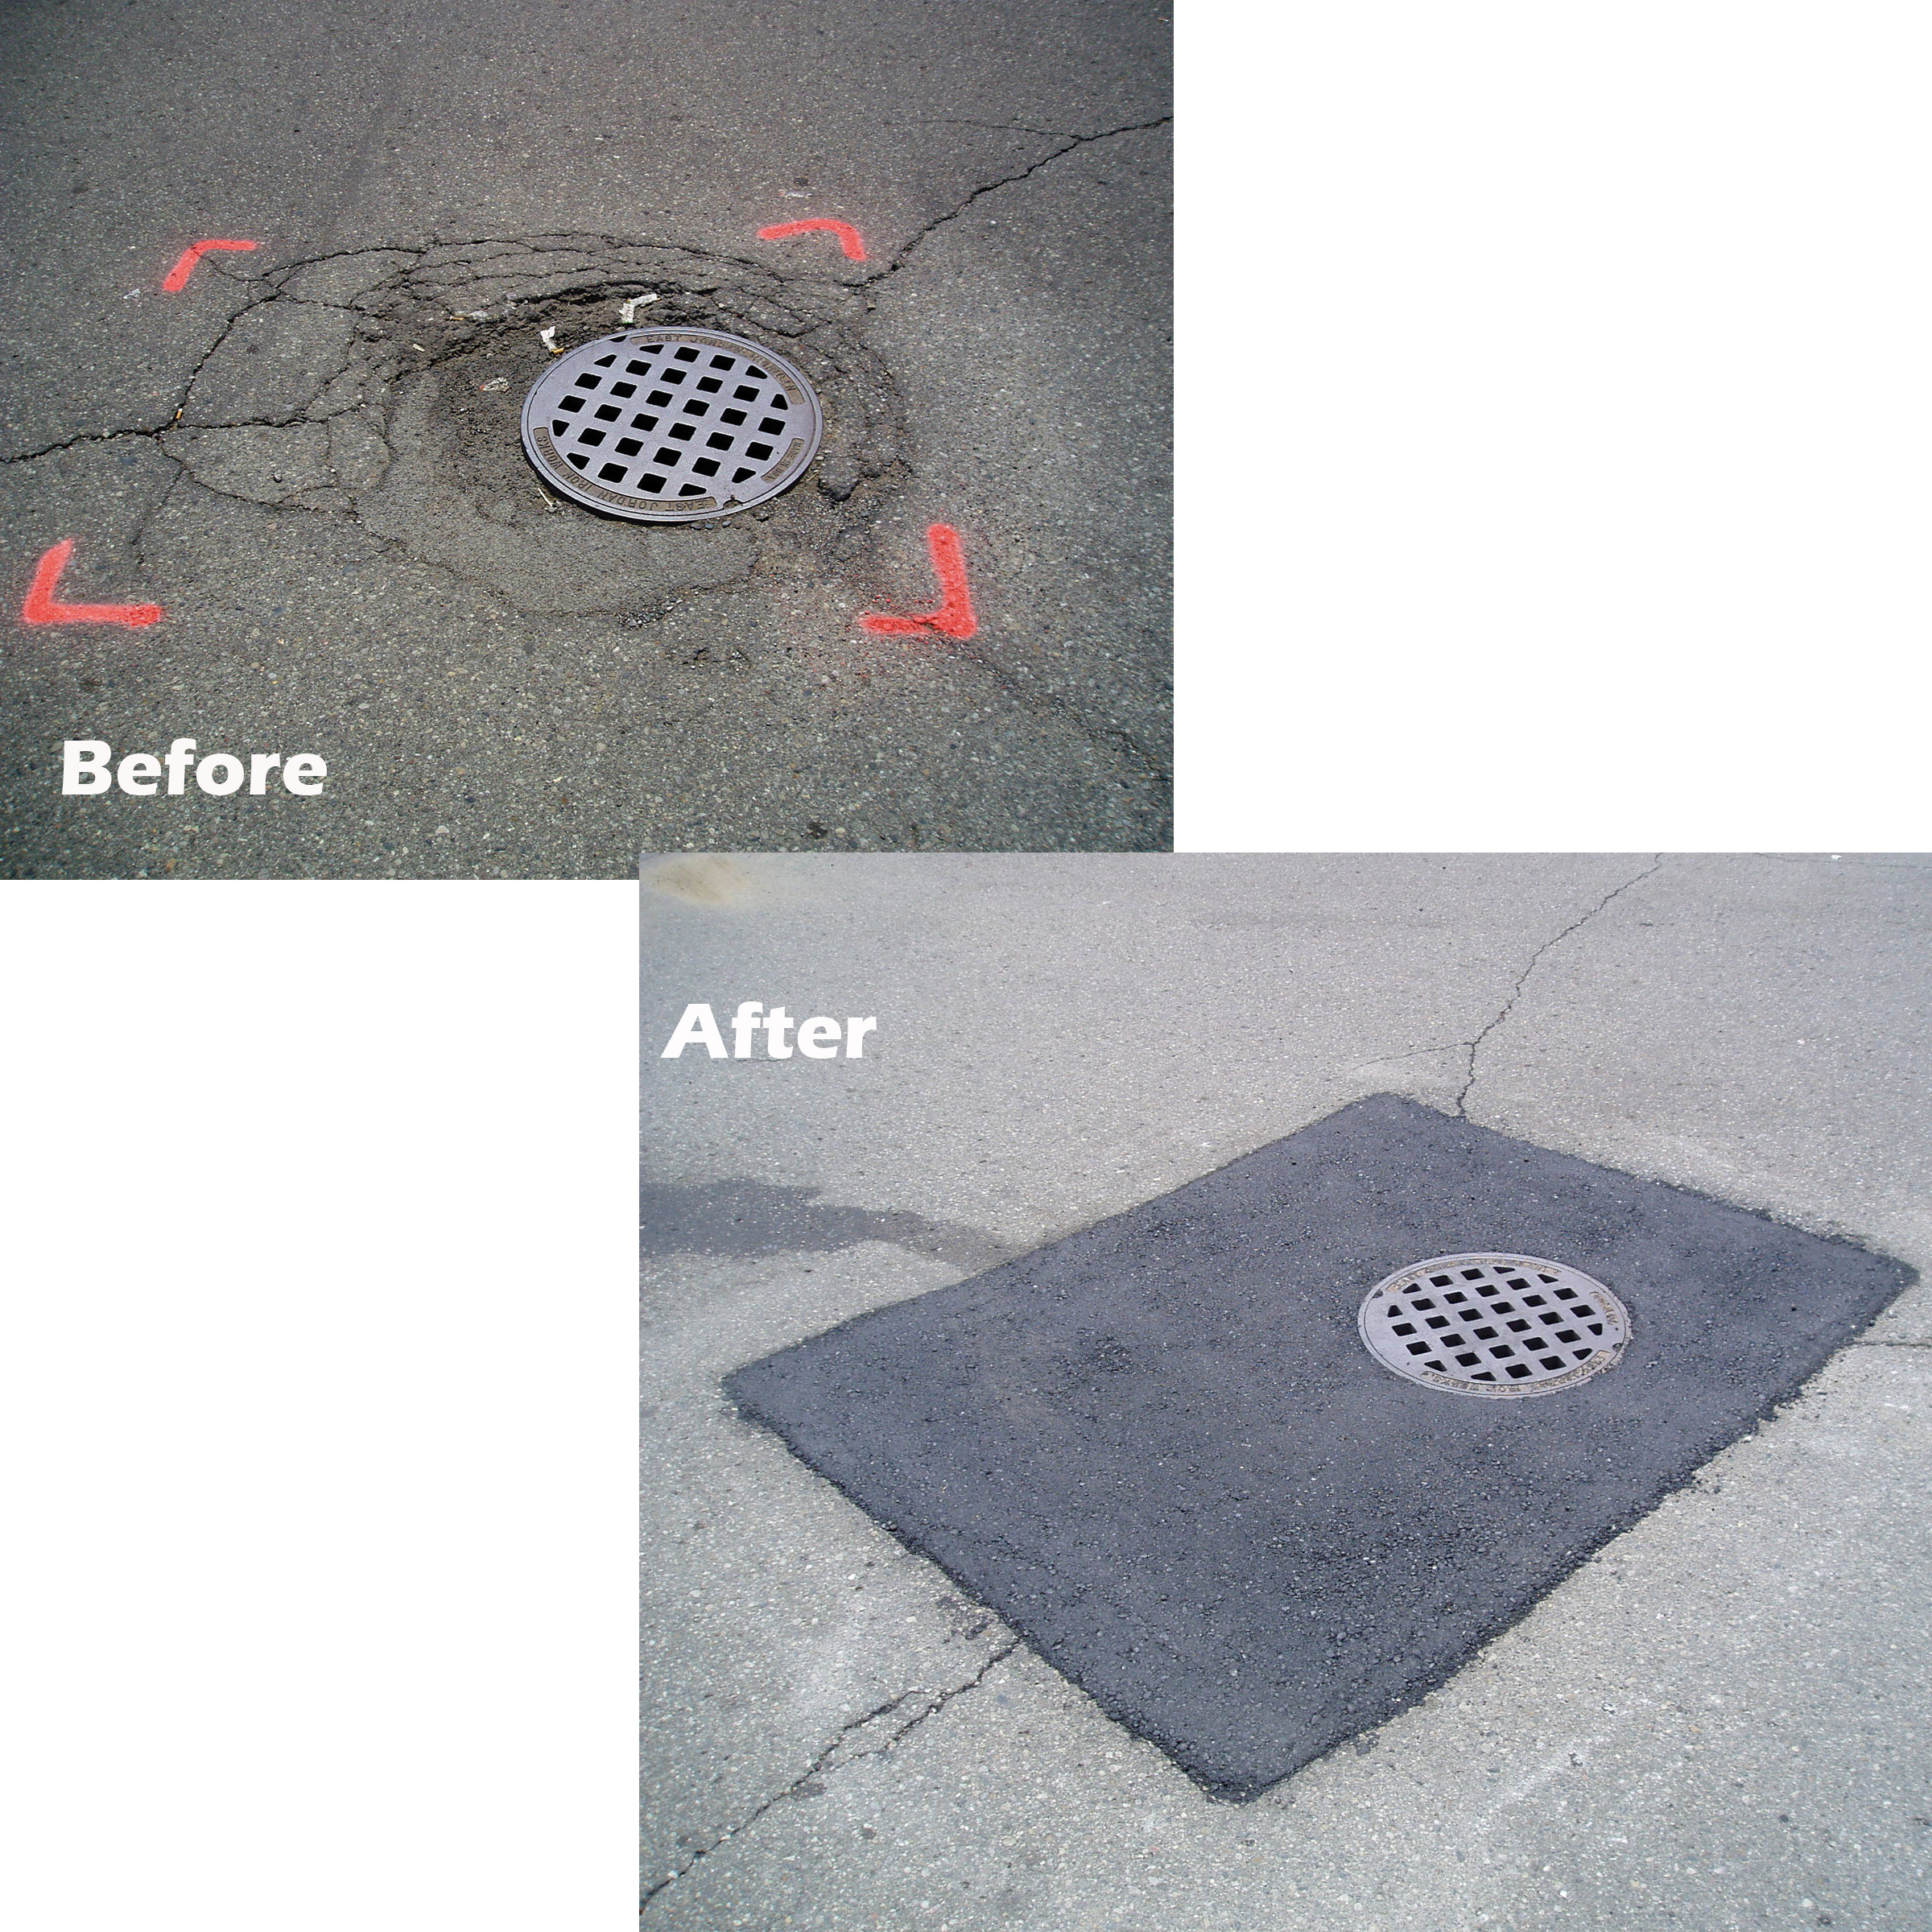 See the before and after pictures of a road repair using KM International's asphalt maintenance equipment.